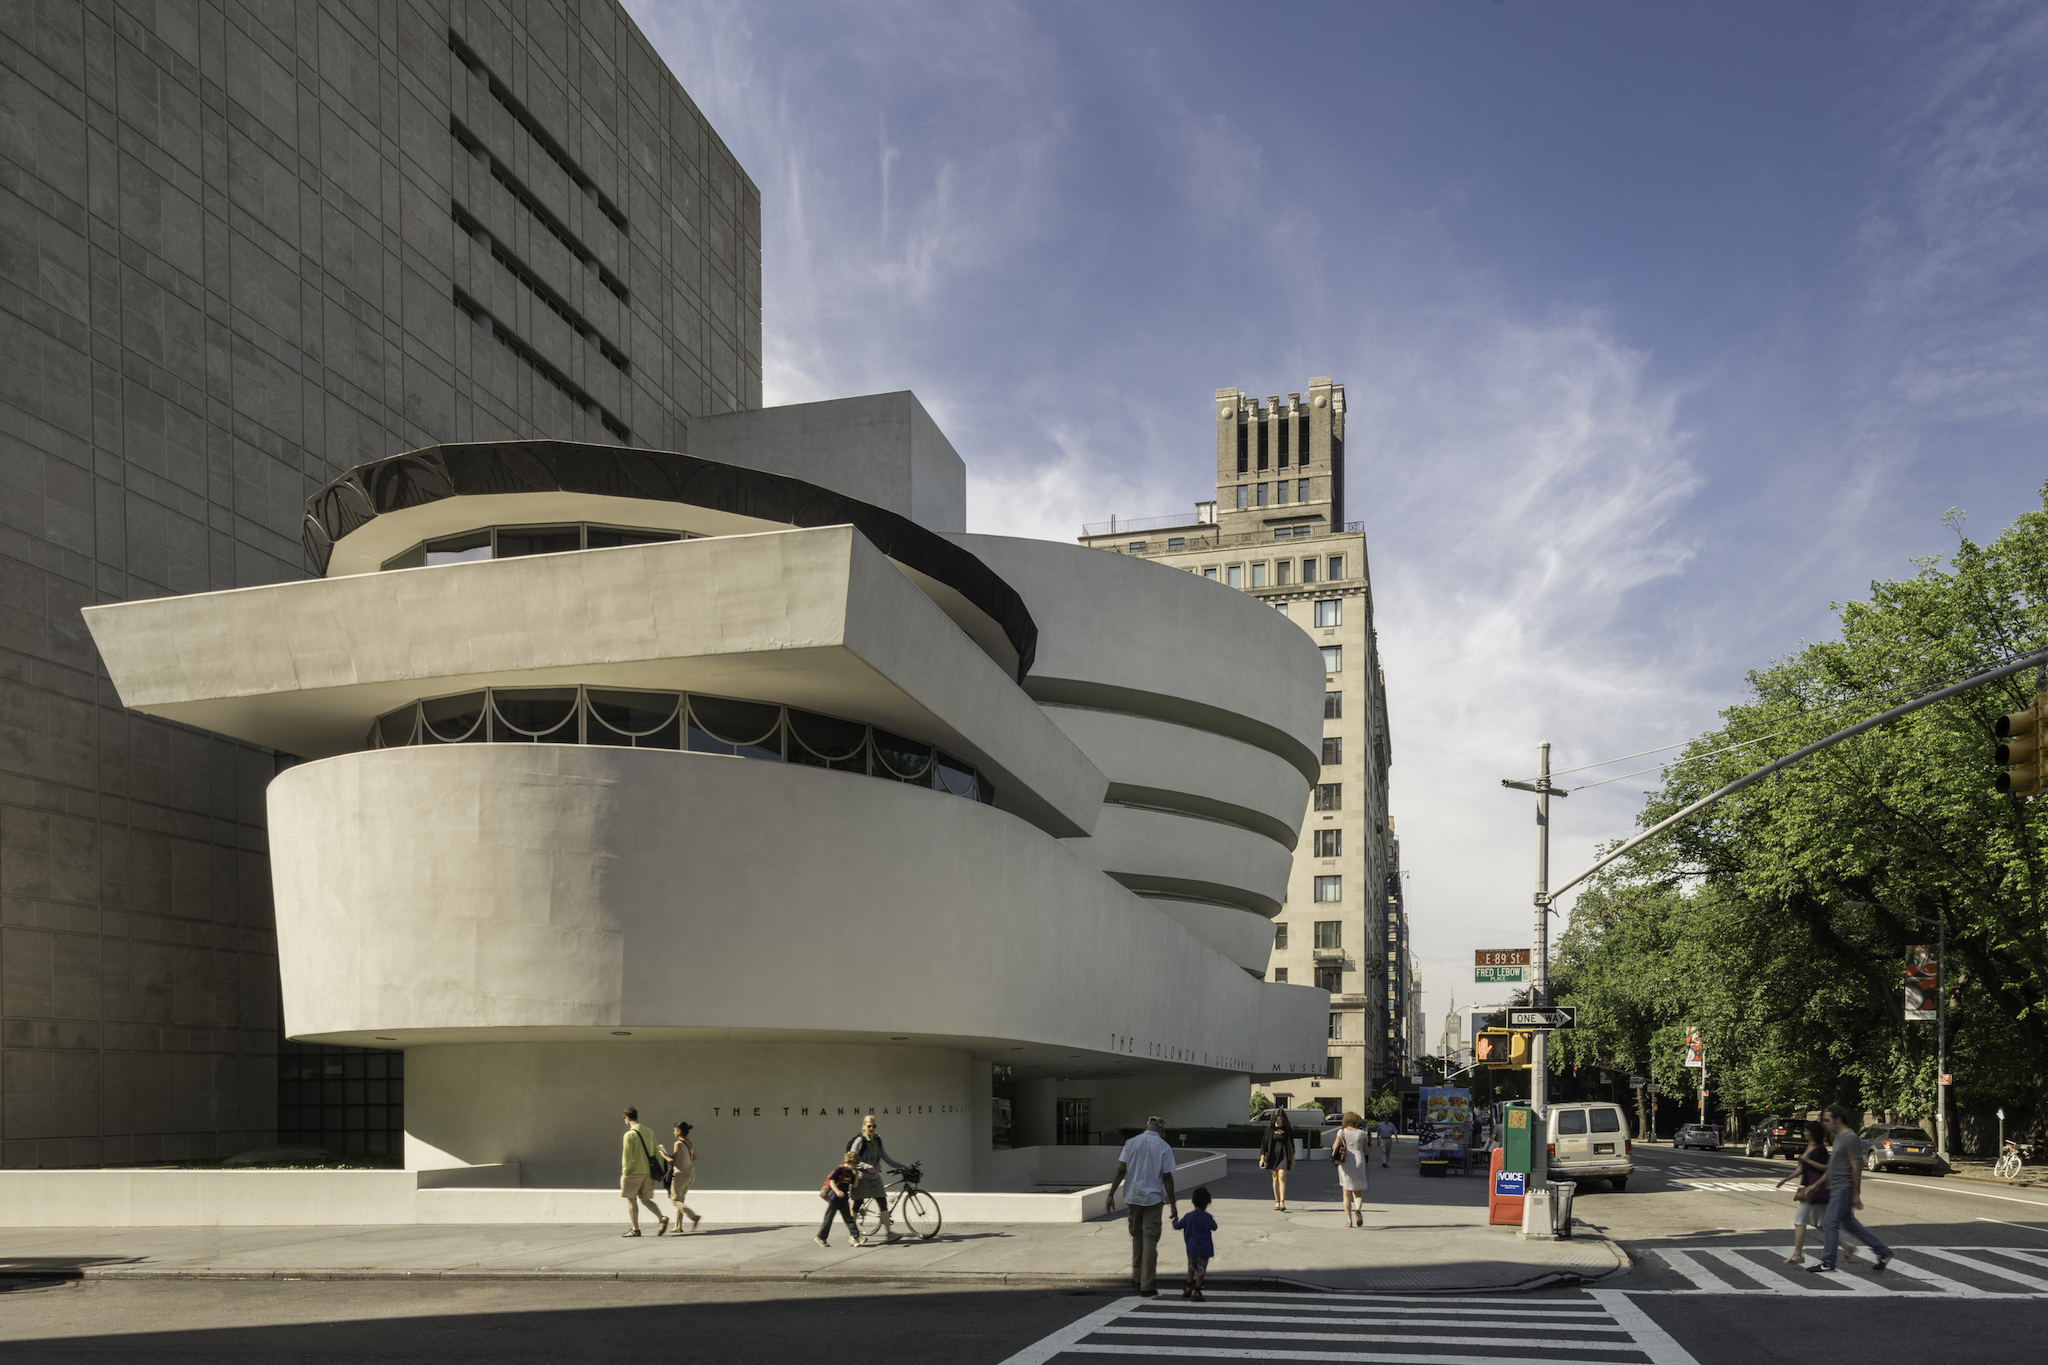 Guggenheim New museum exhibits and more